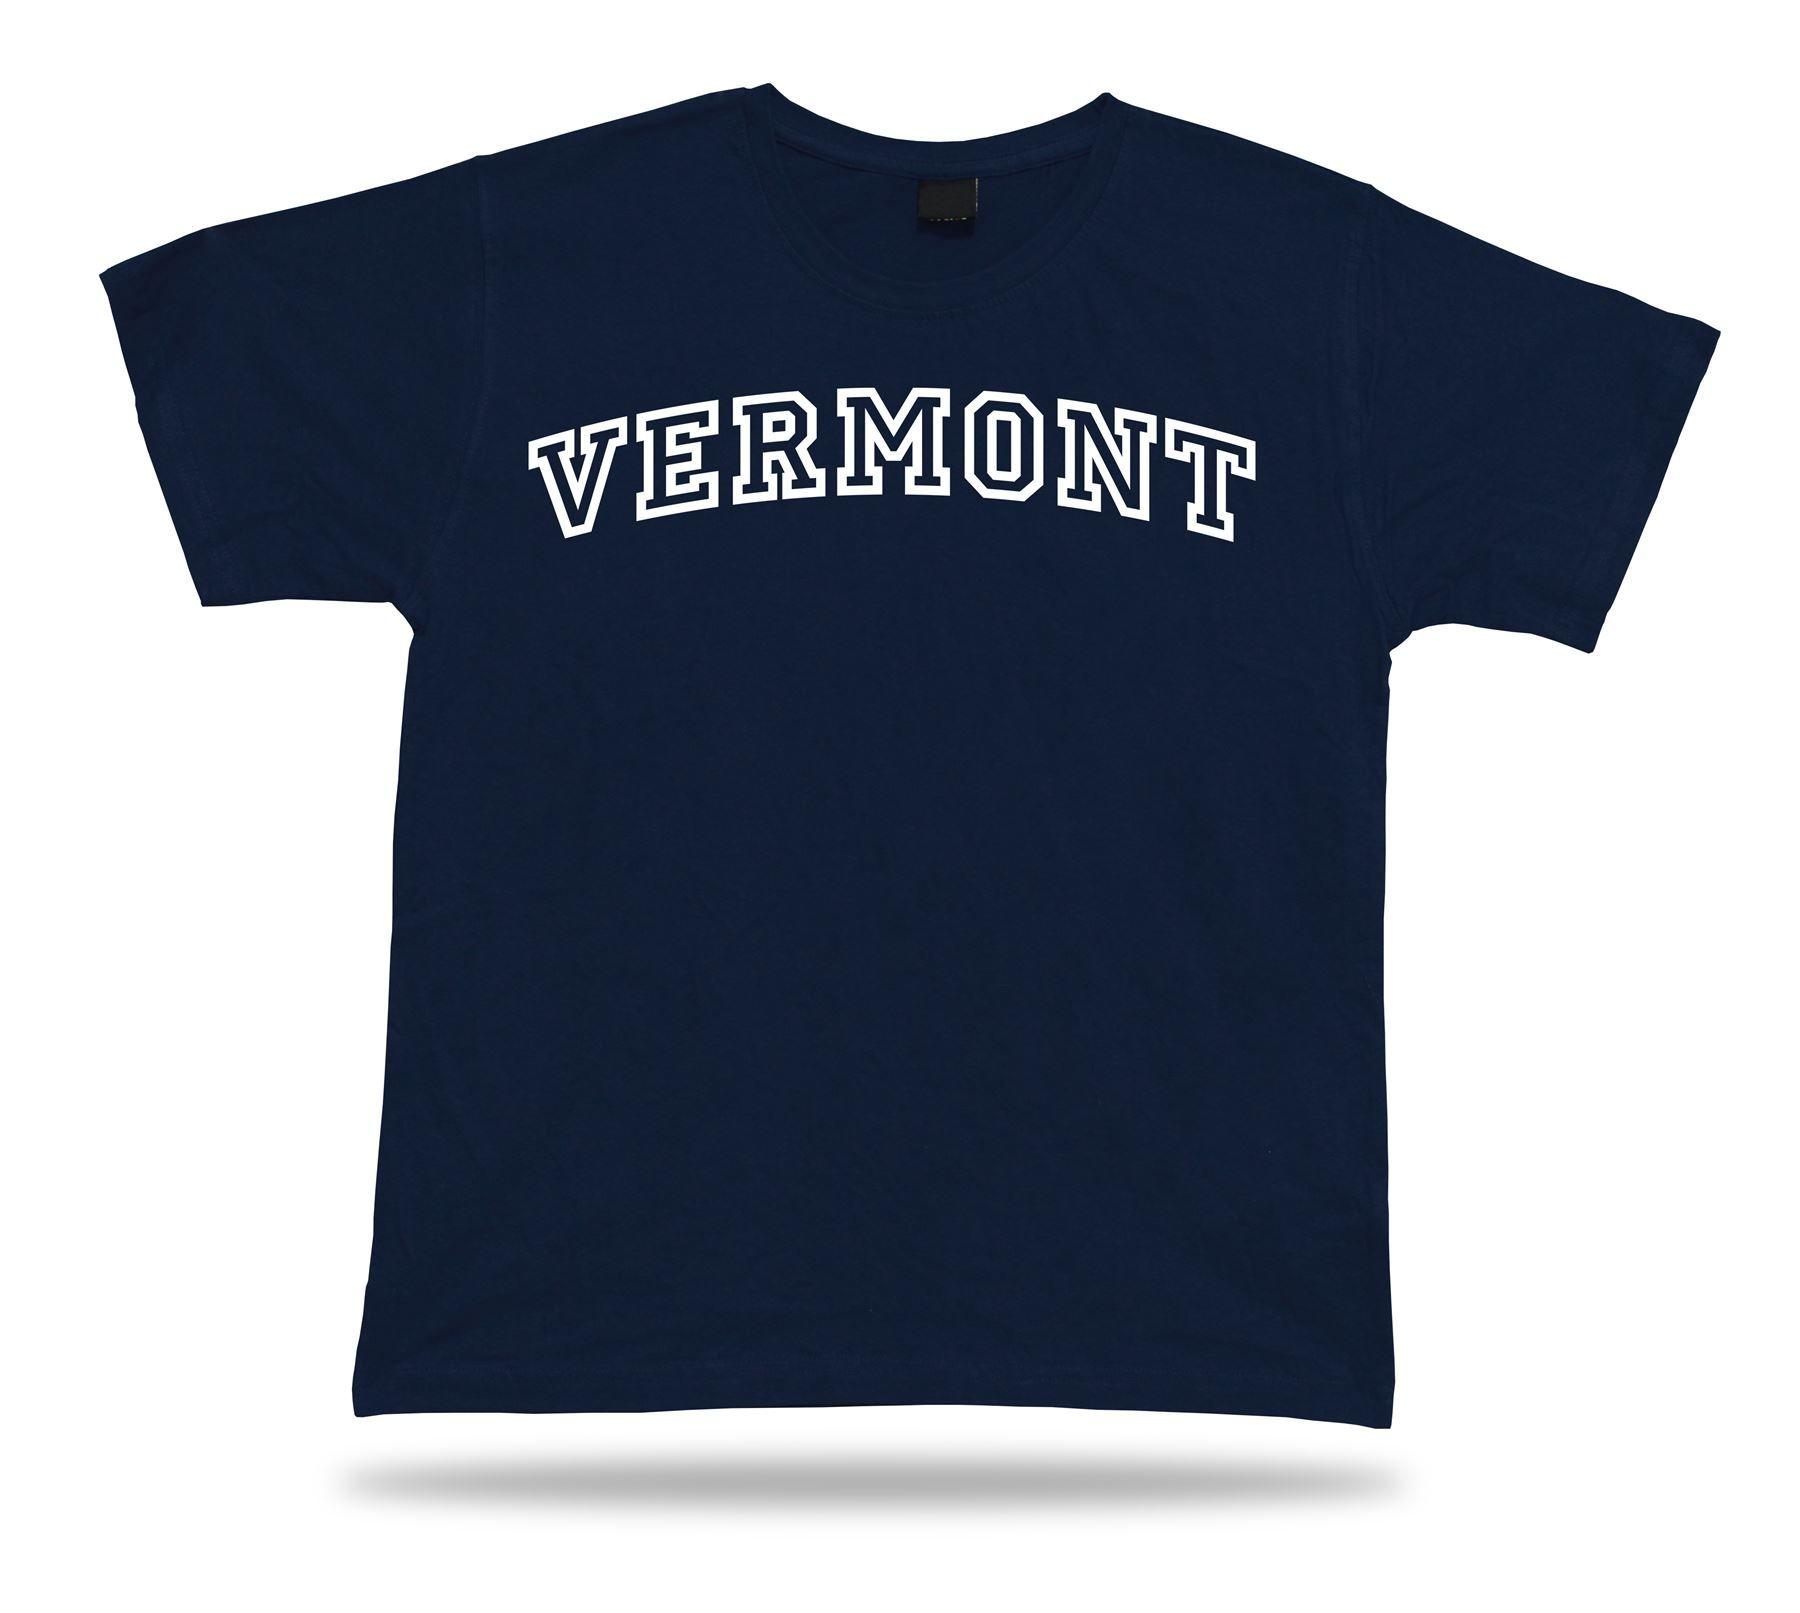 Green Clothing and Apparel Logo - Vermont Green Mountain State VT T Shirt Top Fashion Modern Apparel ...